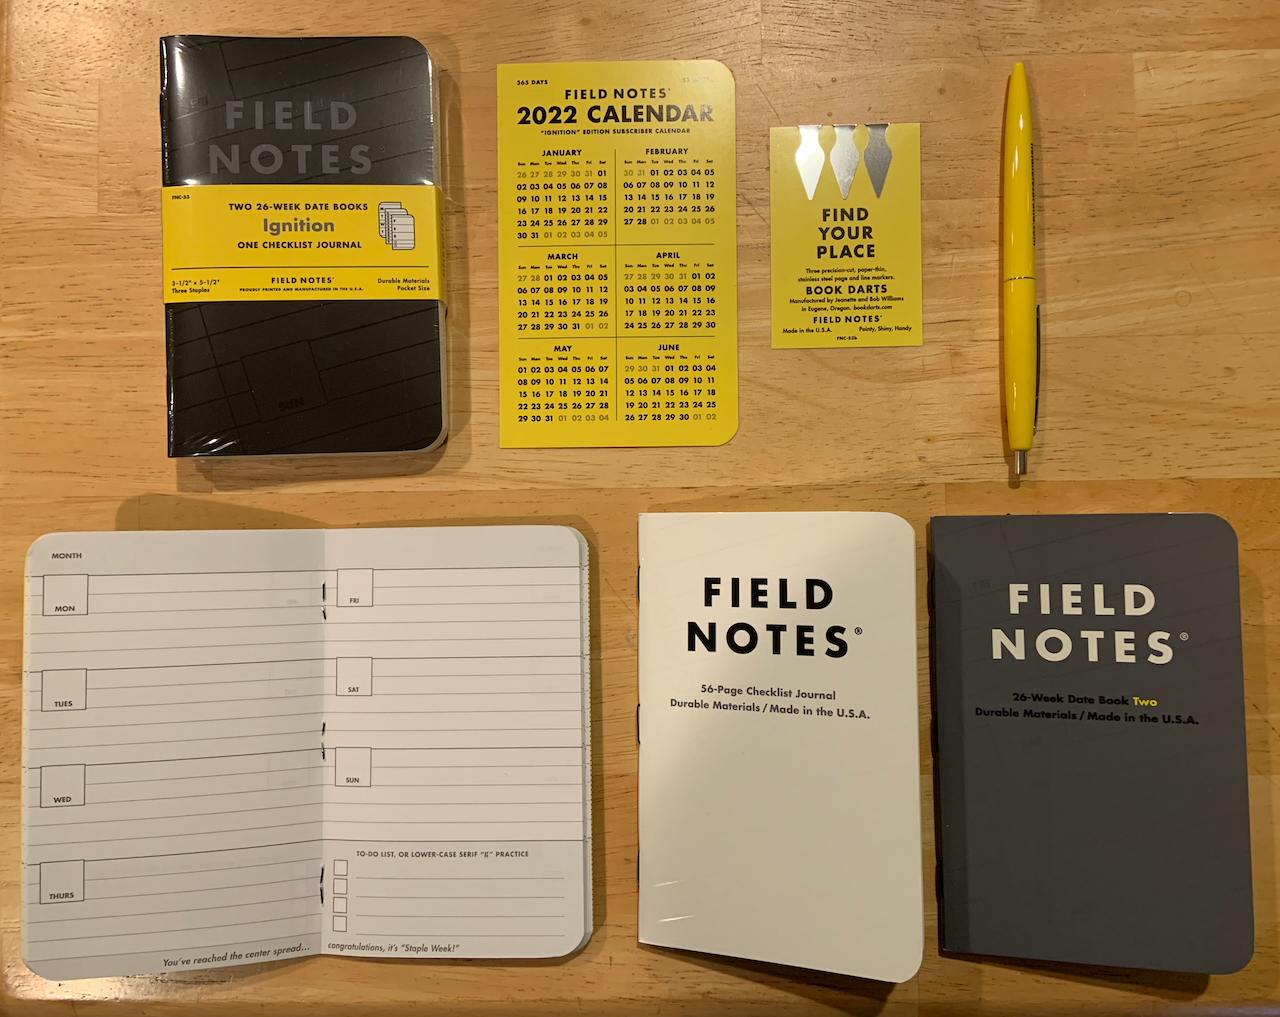 My New Field Notes “Ignition” Notebooks – Jamie Todd Rubin